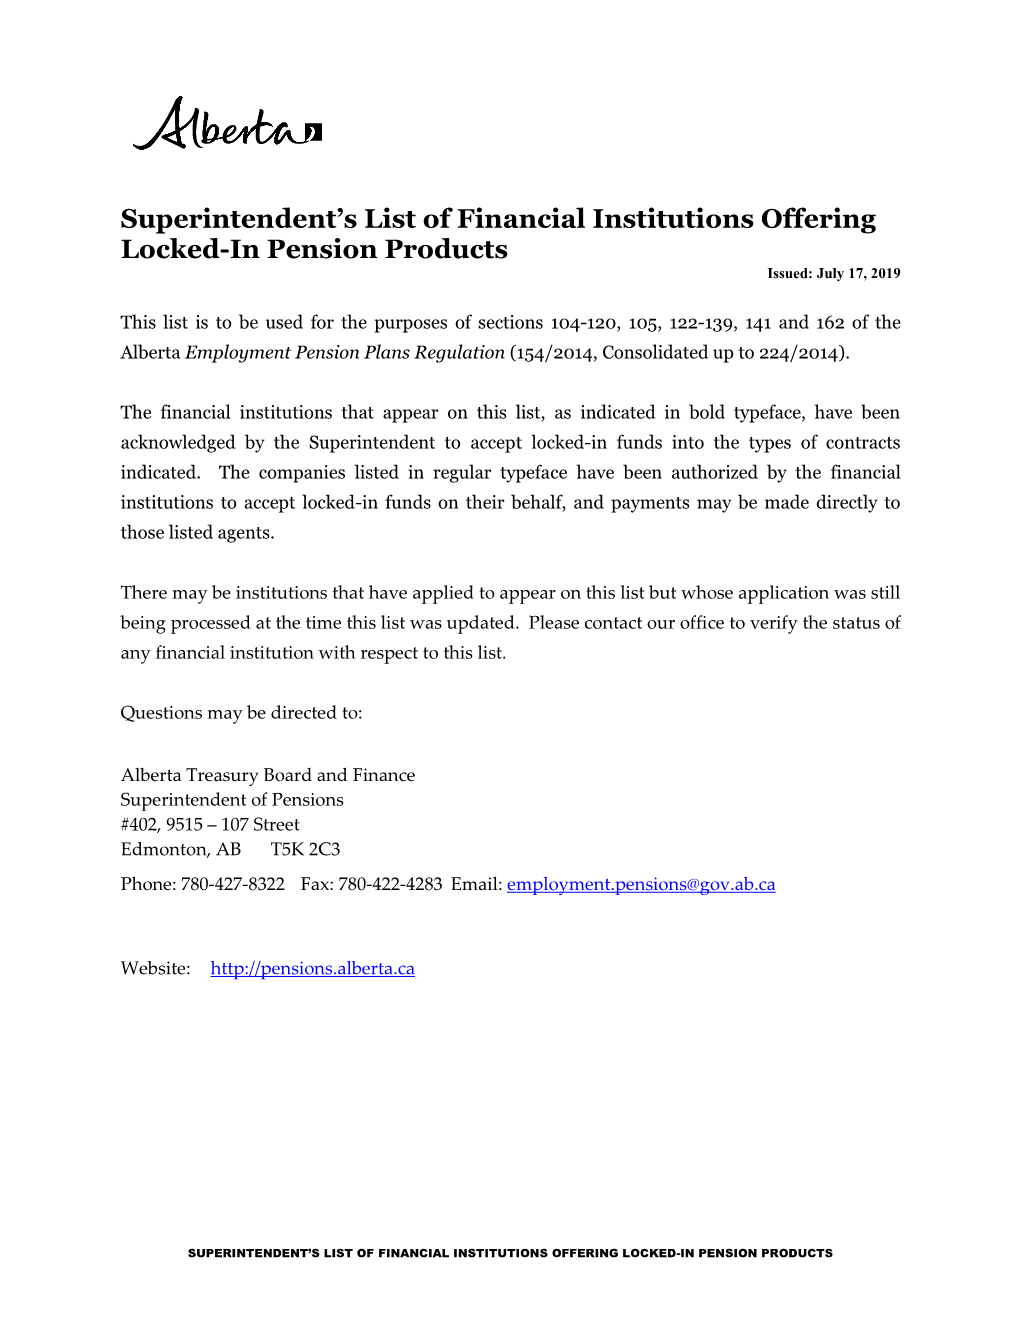 Superintendent's List of Financial Institutions Offering Locked-In